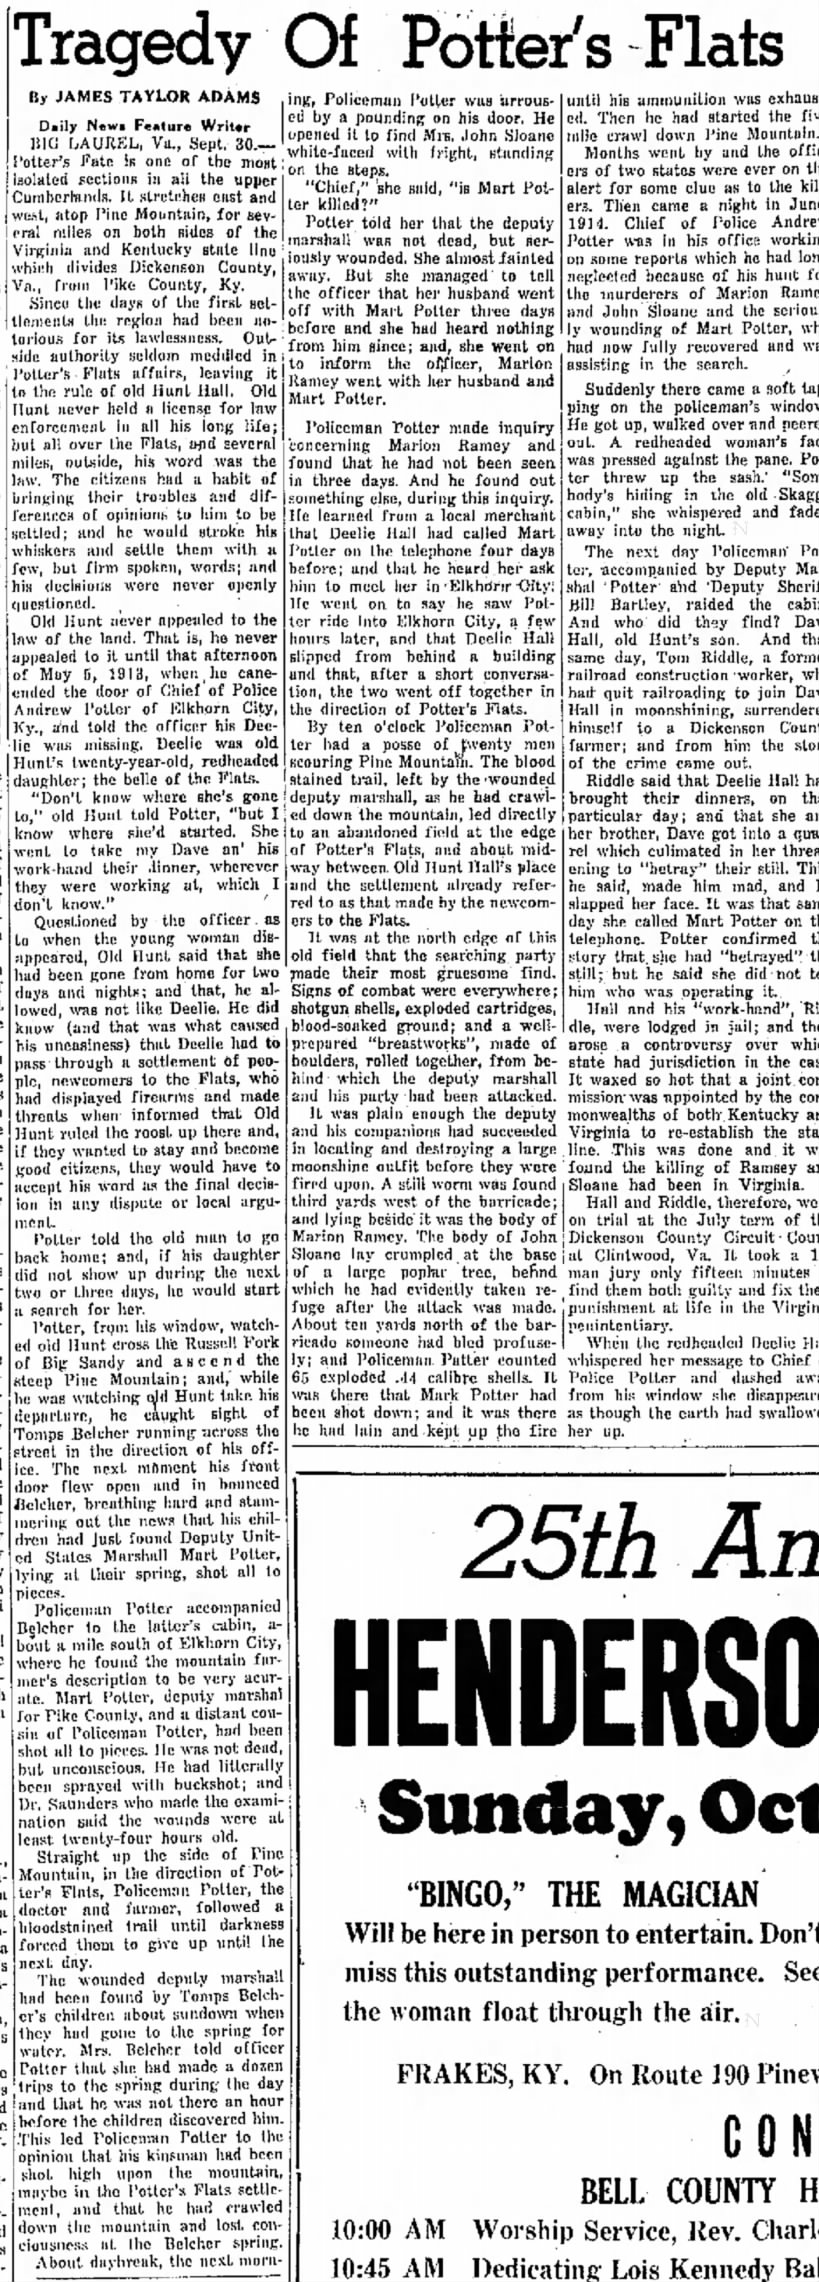 Tragedy of Potter's Flats -Clipped from Middlesboro Daily News, 30 Sep 1950, Sat, Page 4